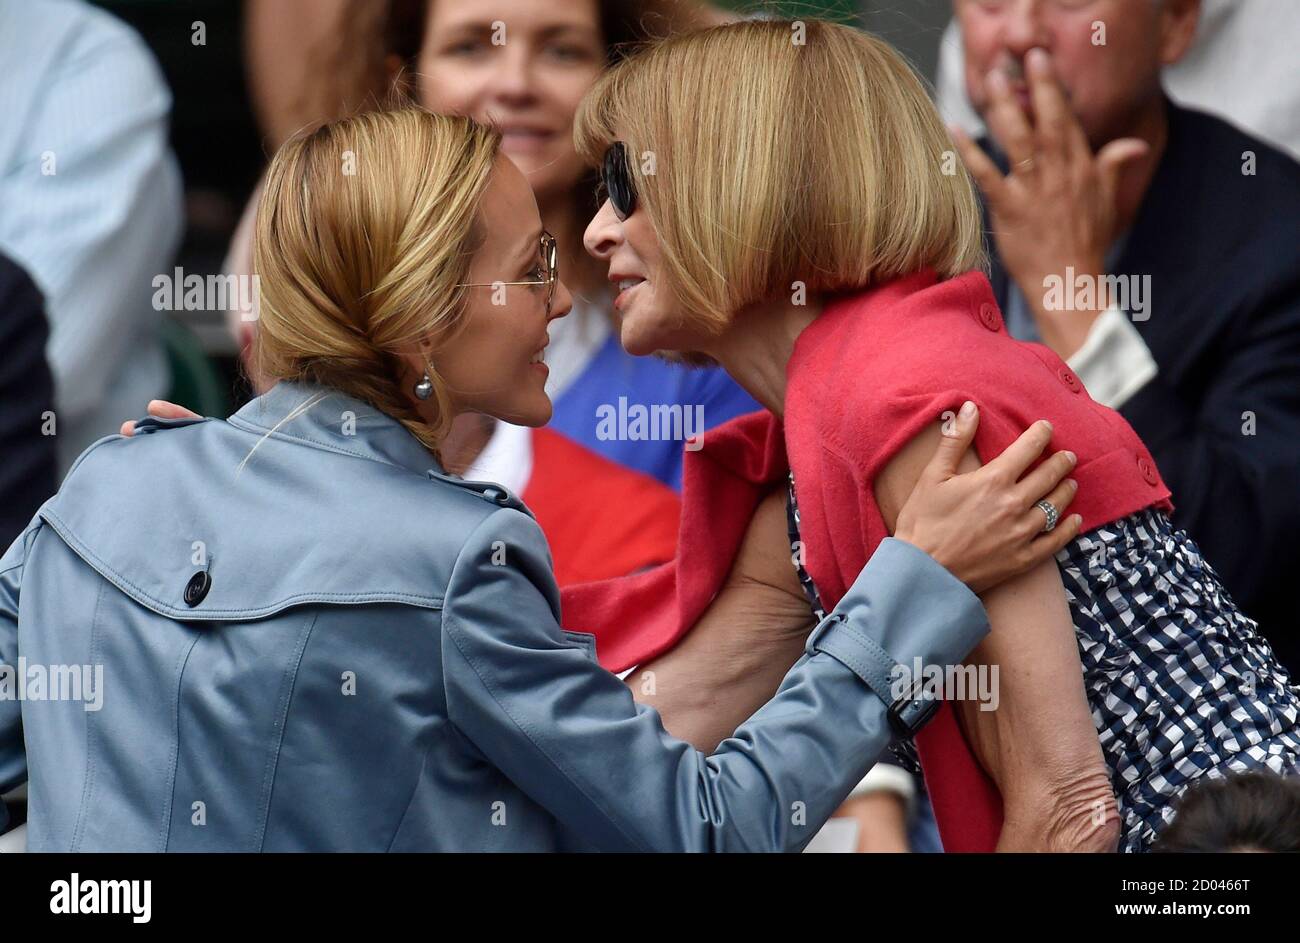 Editor of American Vogue Anna Wintour greets Jelena Djokovic, wife of Novak  Djokovic of Serbia before his Men's Singles Final match against Roger  Federer of Switzerland at the Wimbledon Tennis Championships in